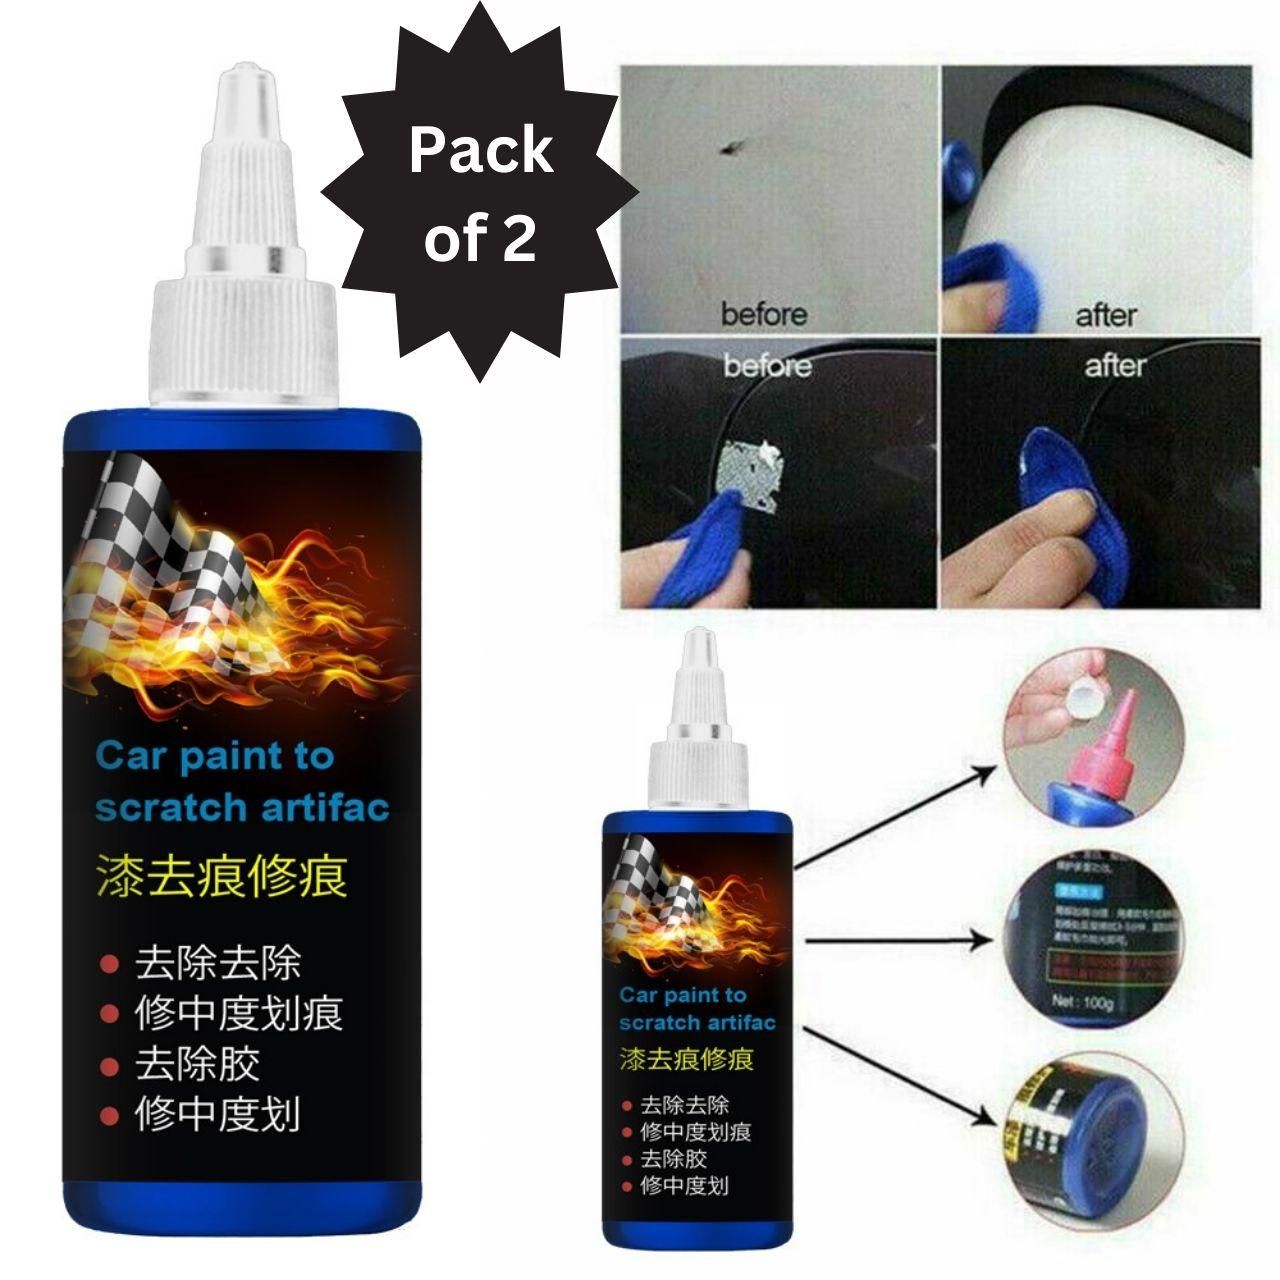 Repair The Scratch and Shine (Pack of 2)